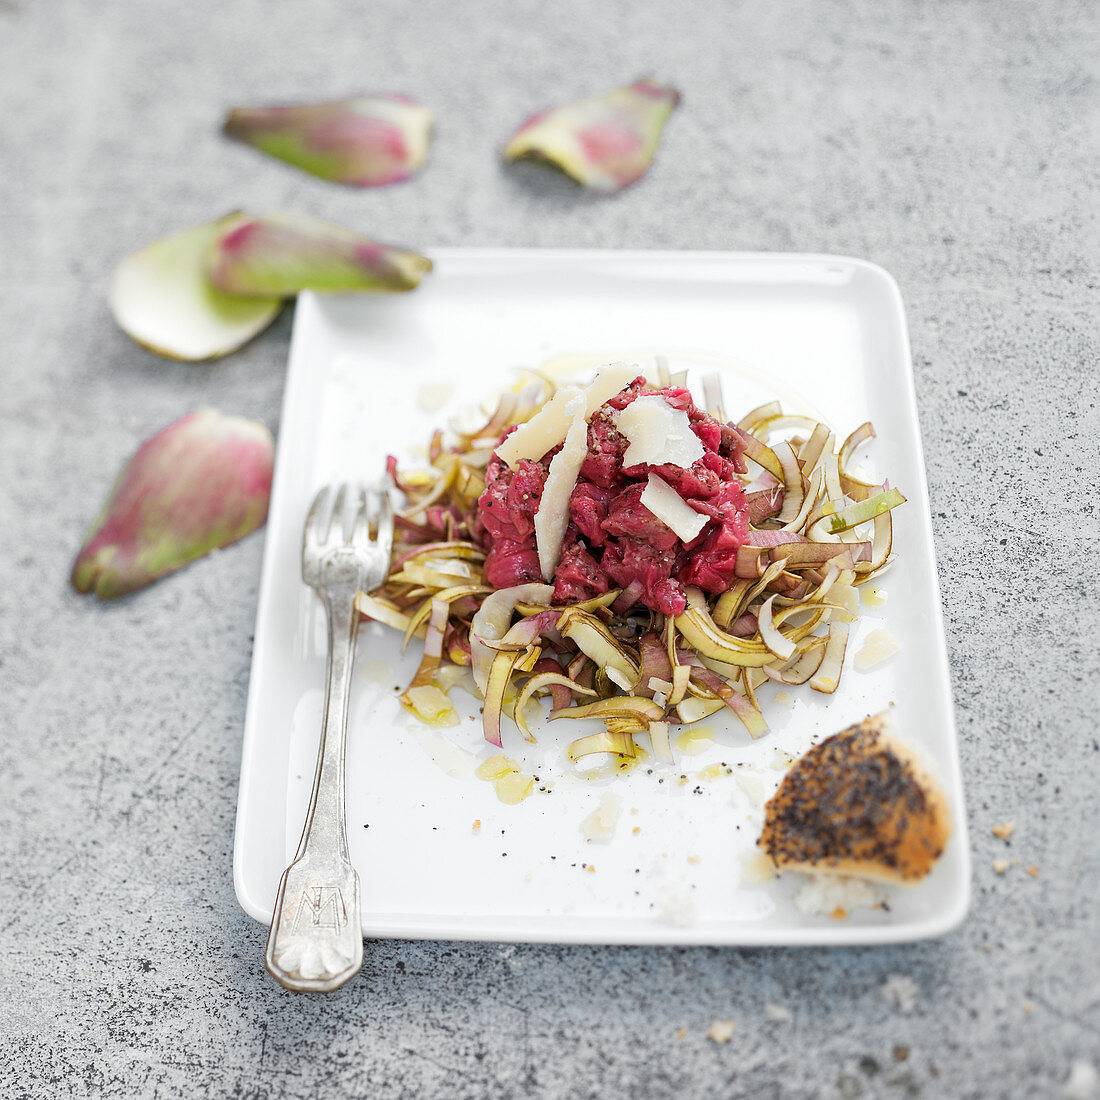 Beef tartare with artichokes and parmesan